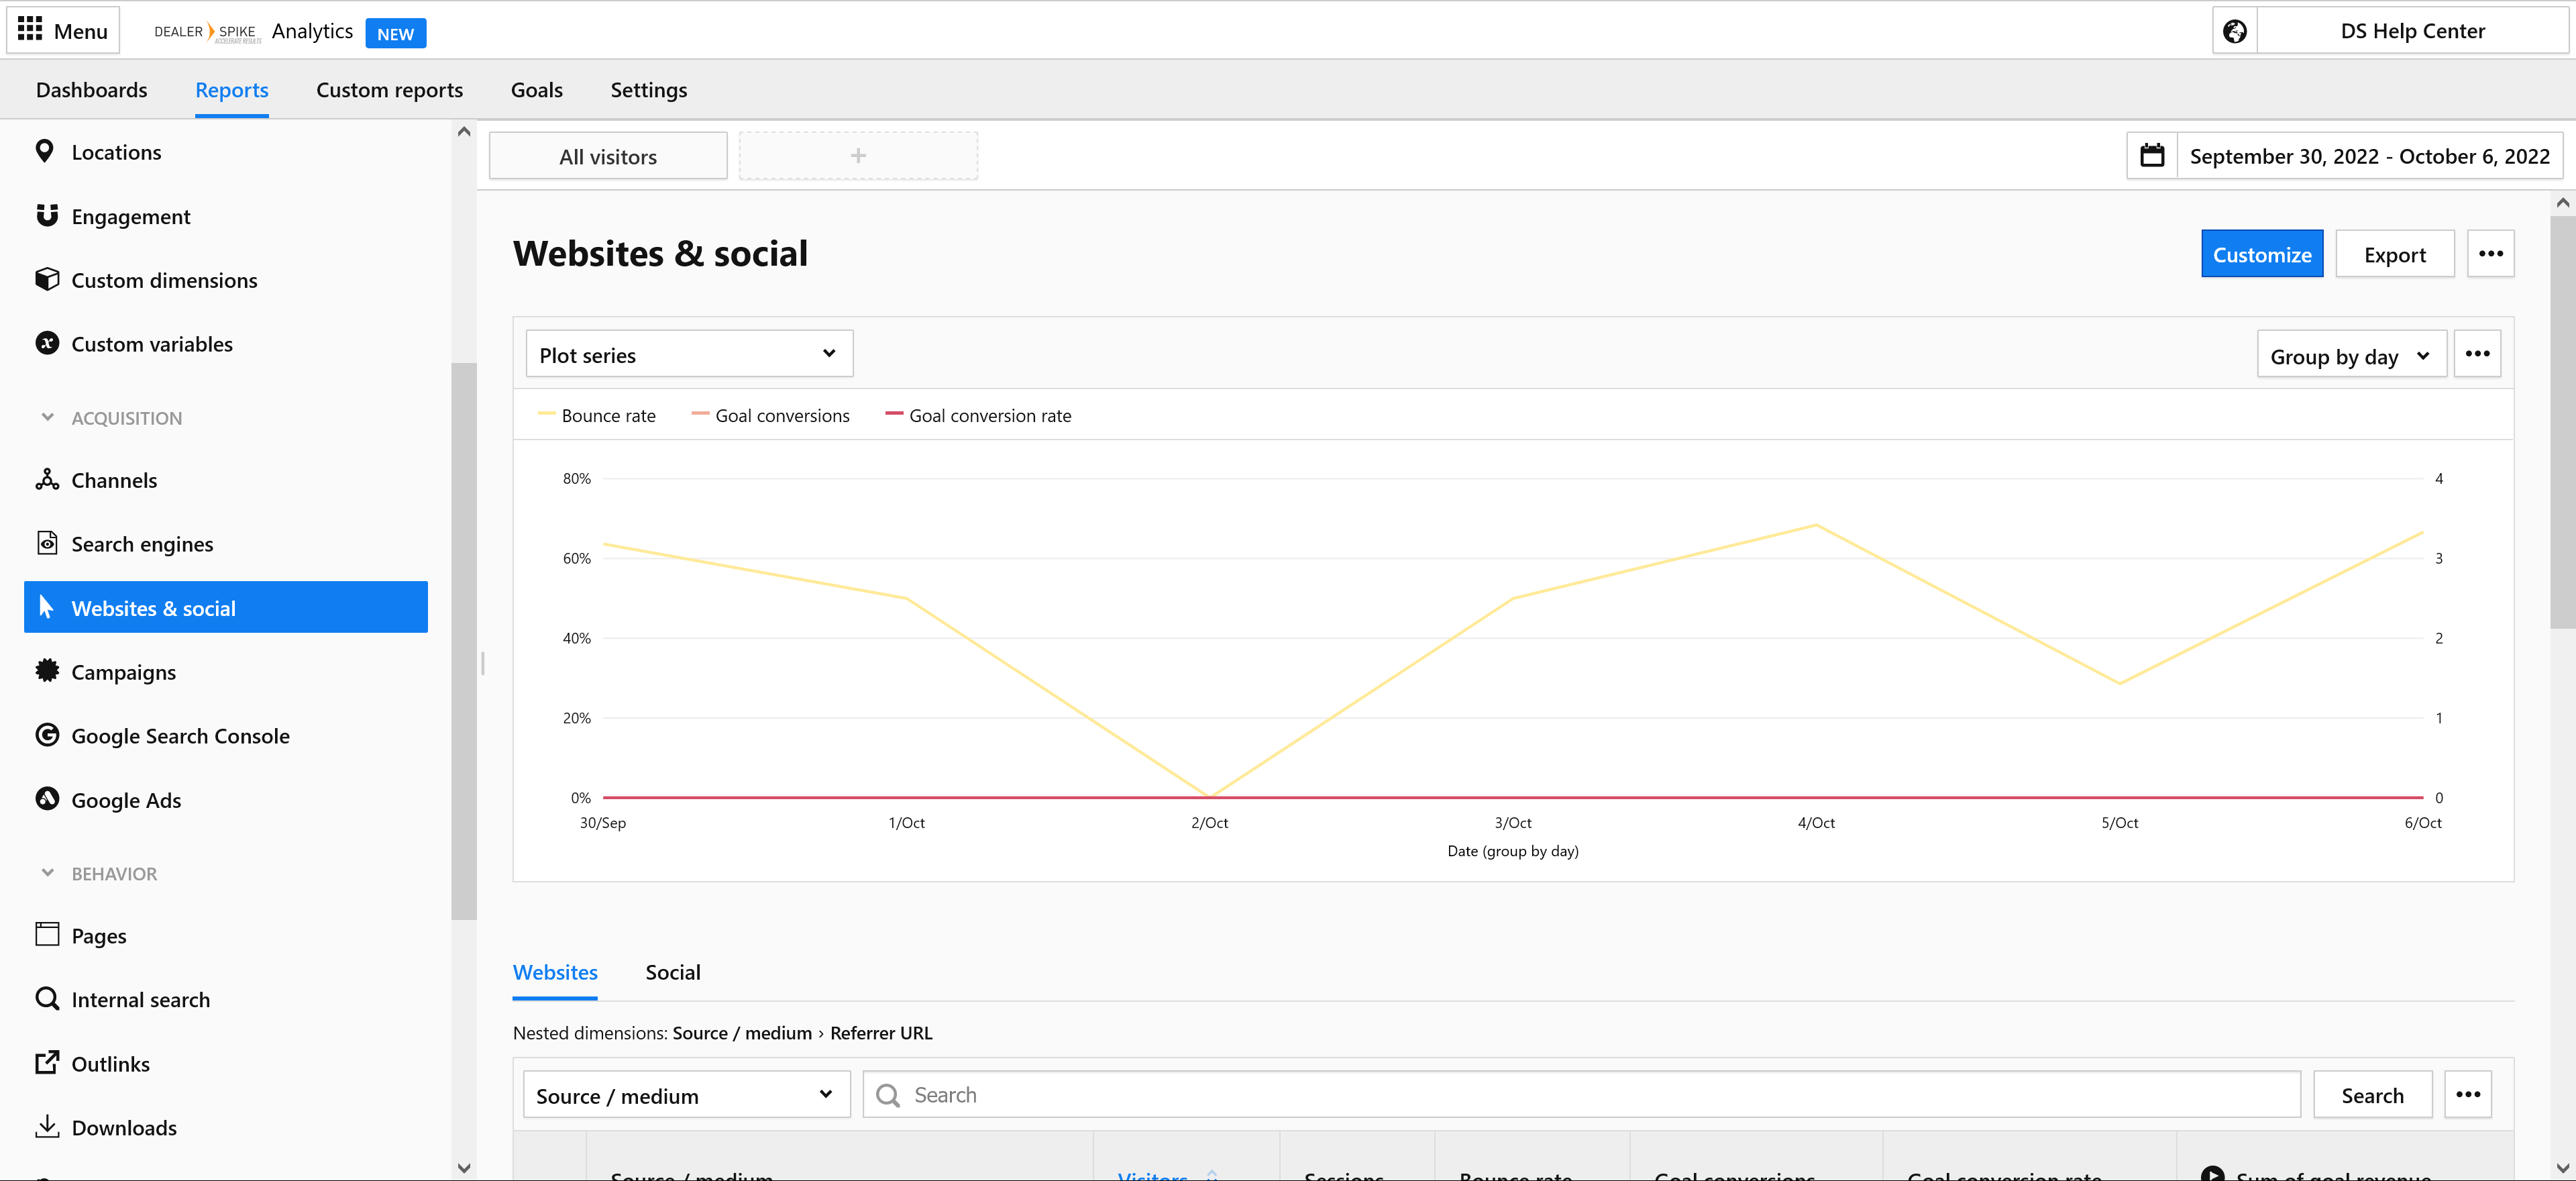 Websites and Social page in Dealer Spike Analytics